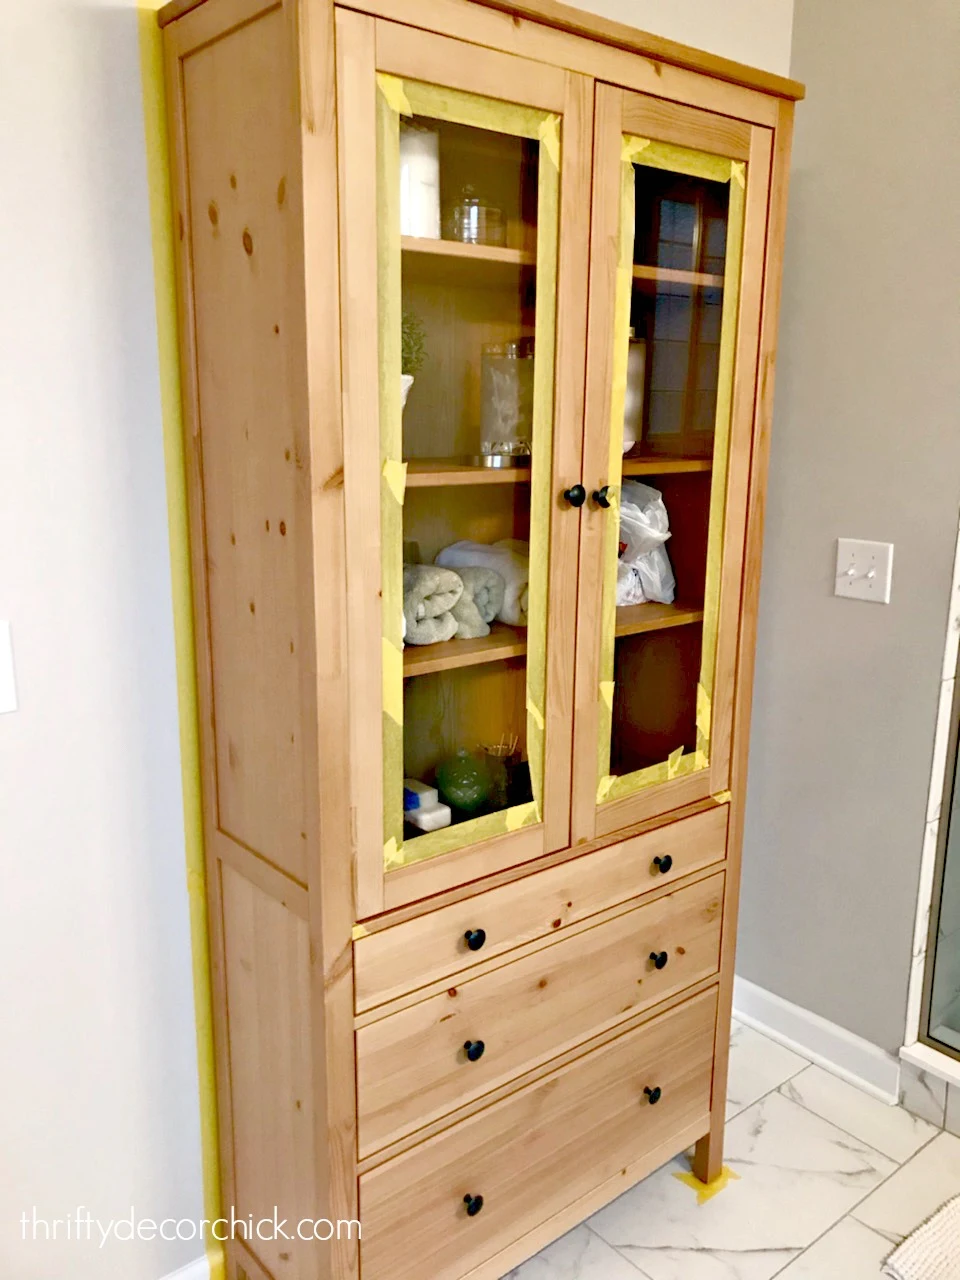 Wood IKEA cabinet with drawers and glass doors